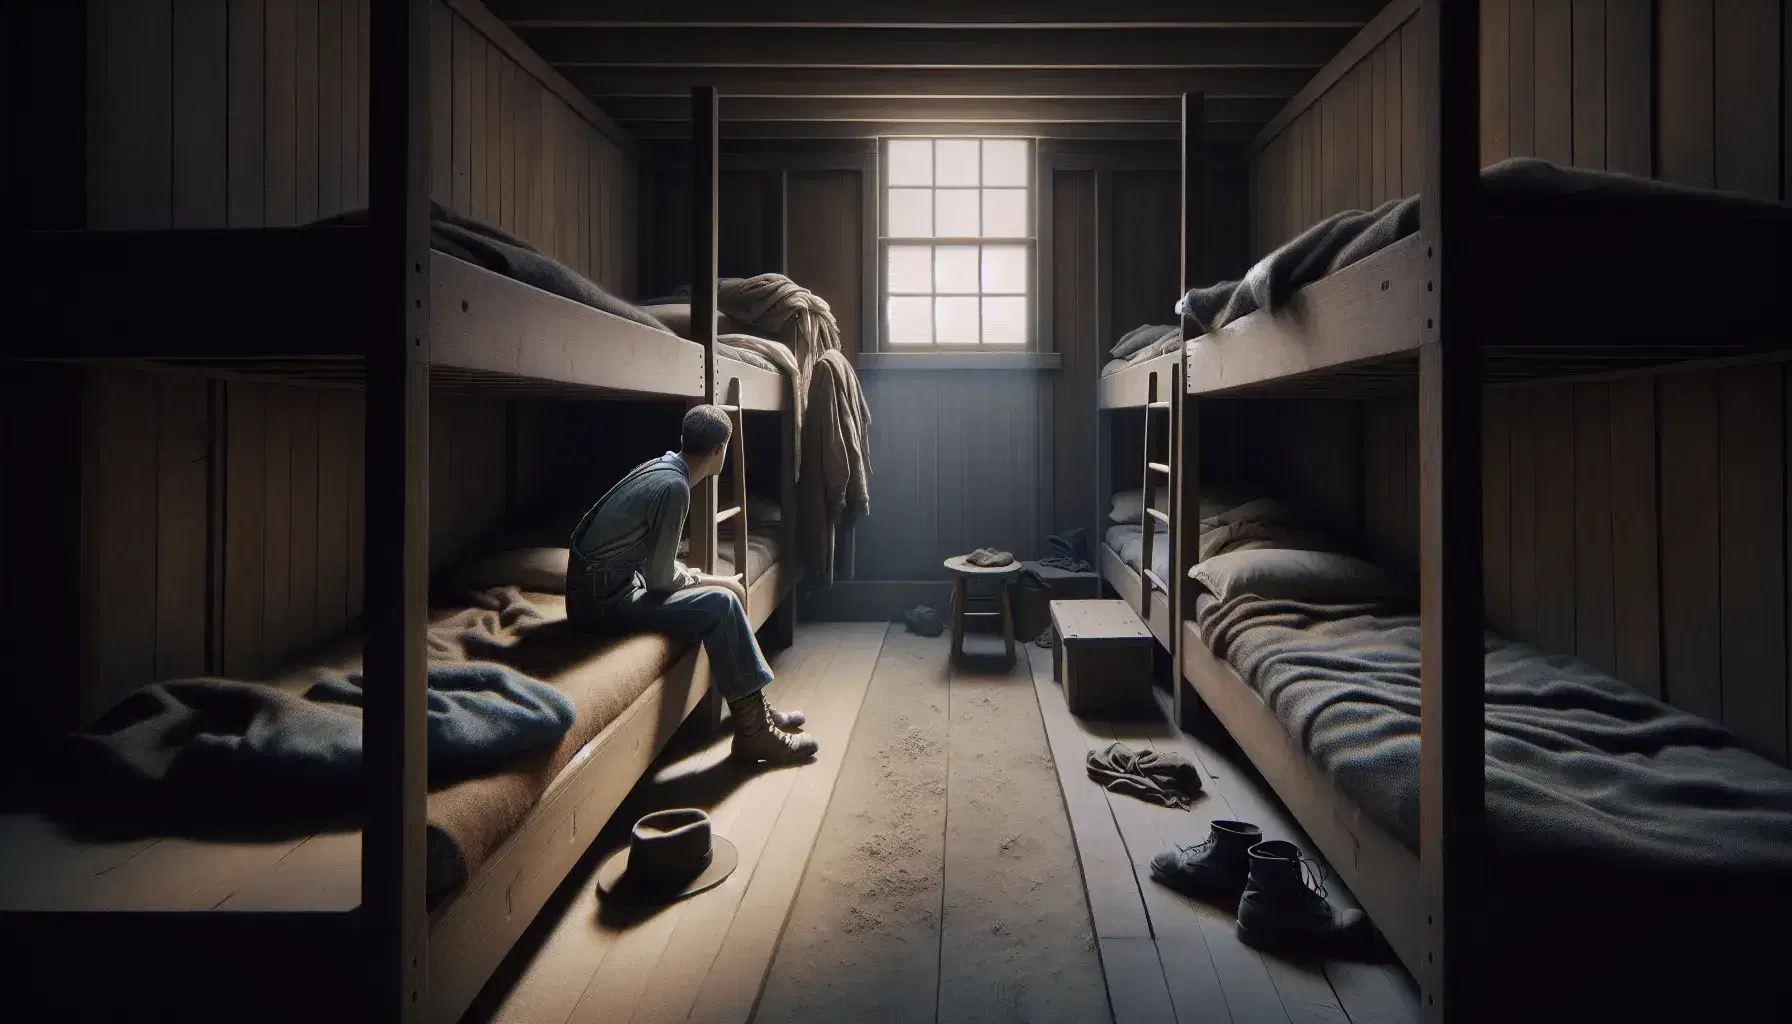 Dim bunkhouse interior with wooden bunks and faded blue blankets, a figure sitting despondently on a bunk, another gazing out a window, and a table with scattered playing cards.